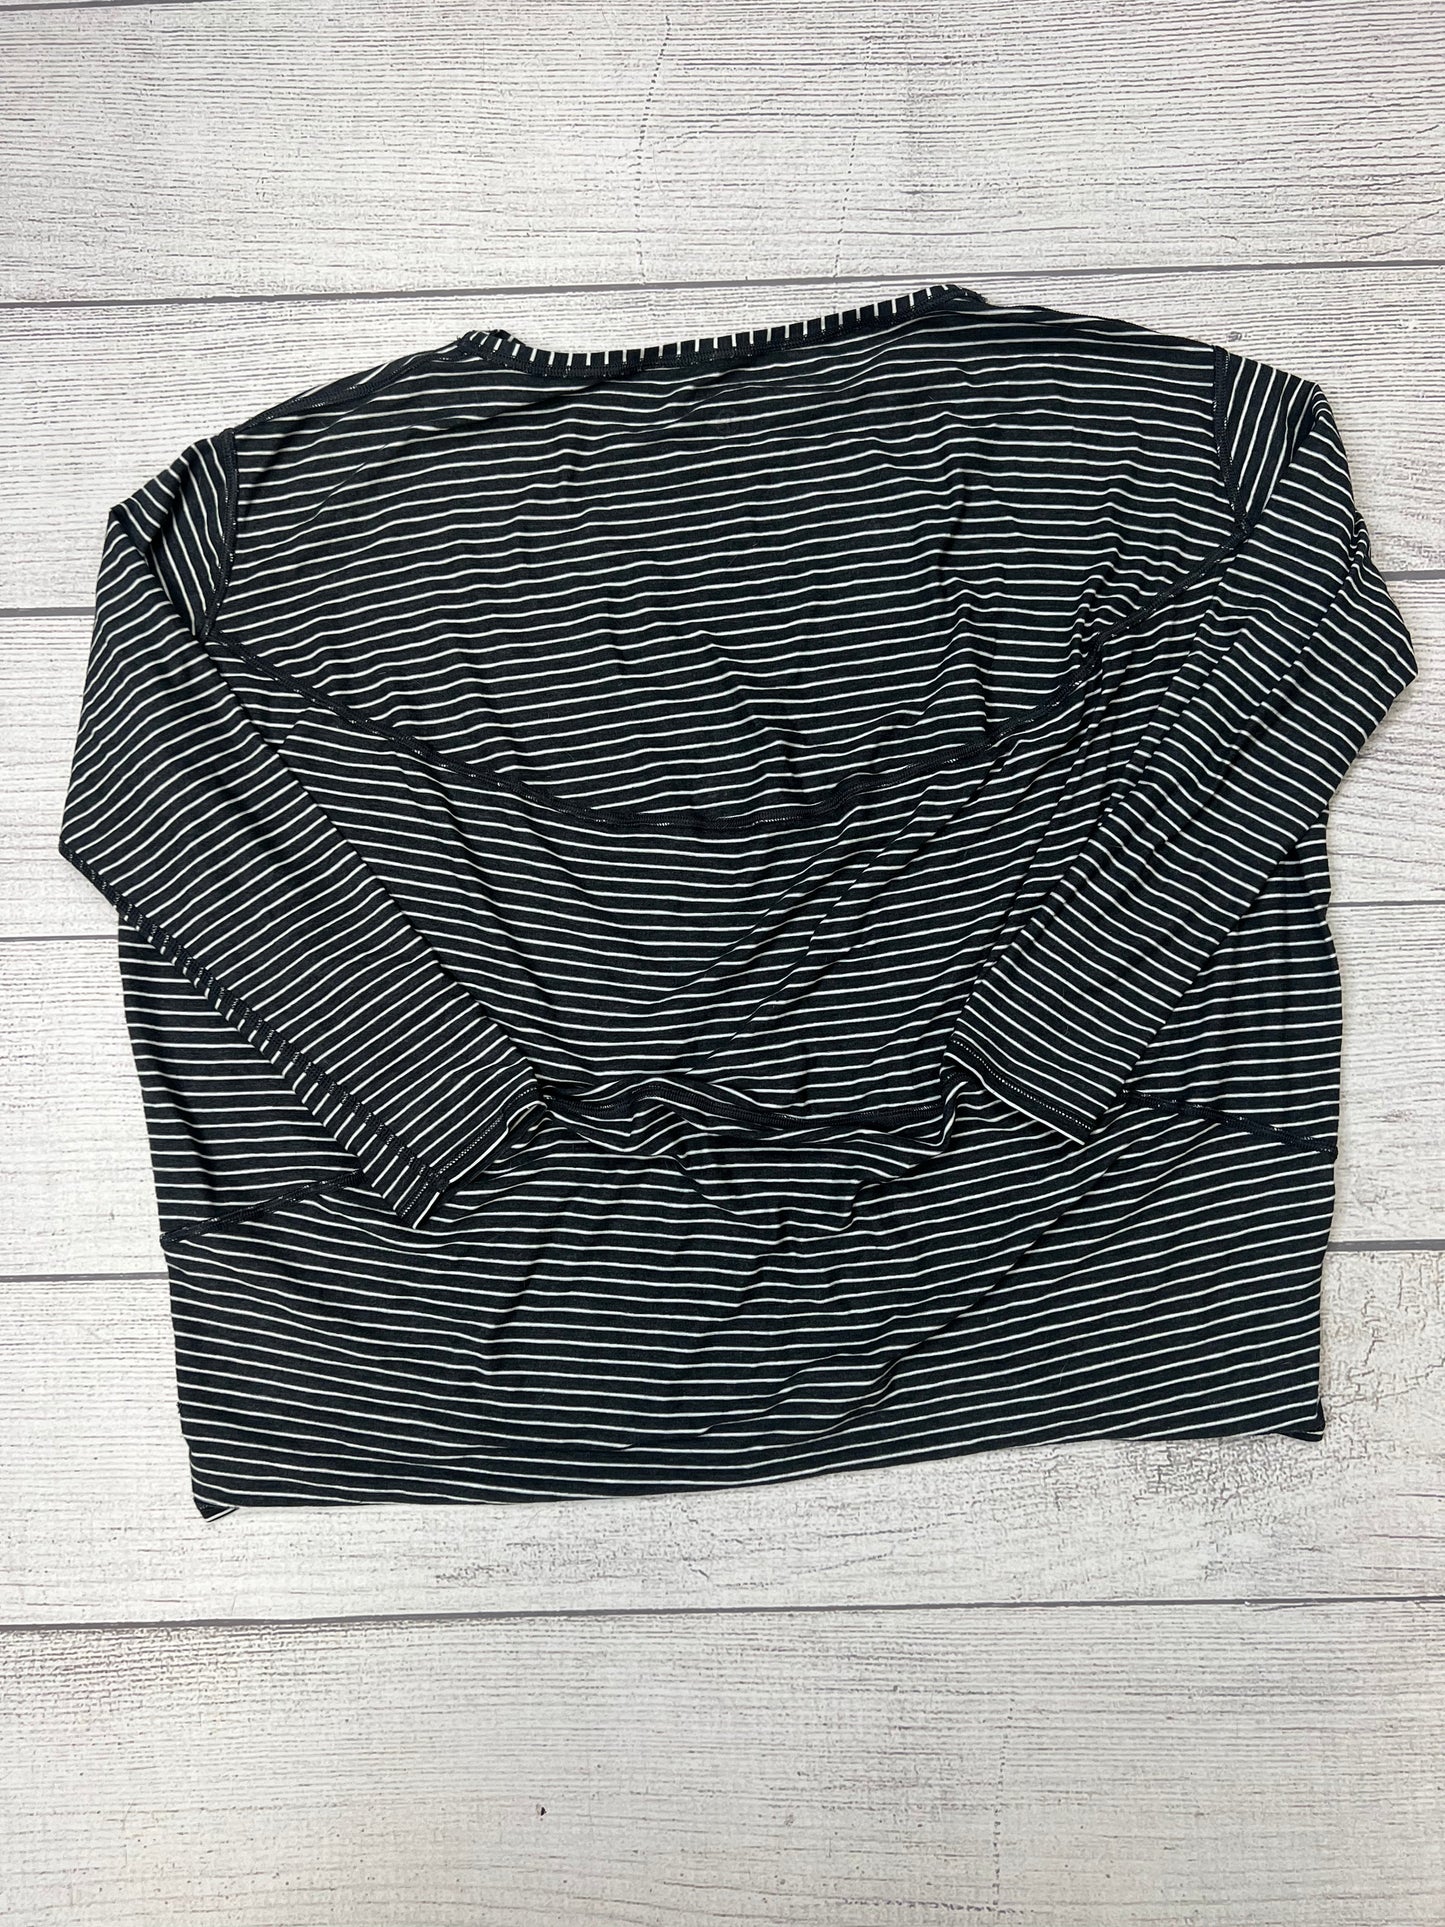 Striped Athletic Top Long Sleeve Collar Lululemon, Size L